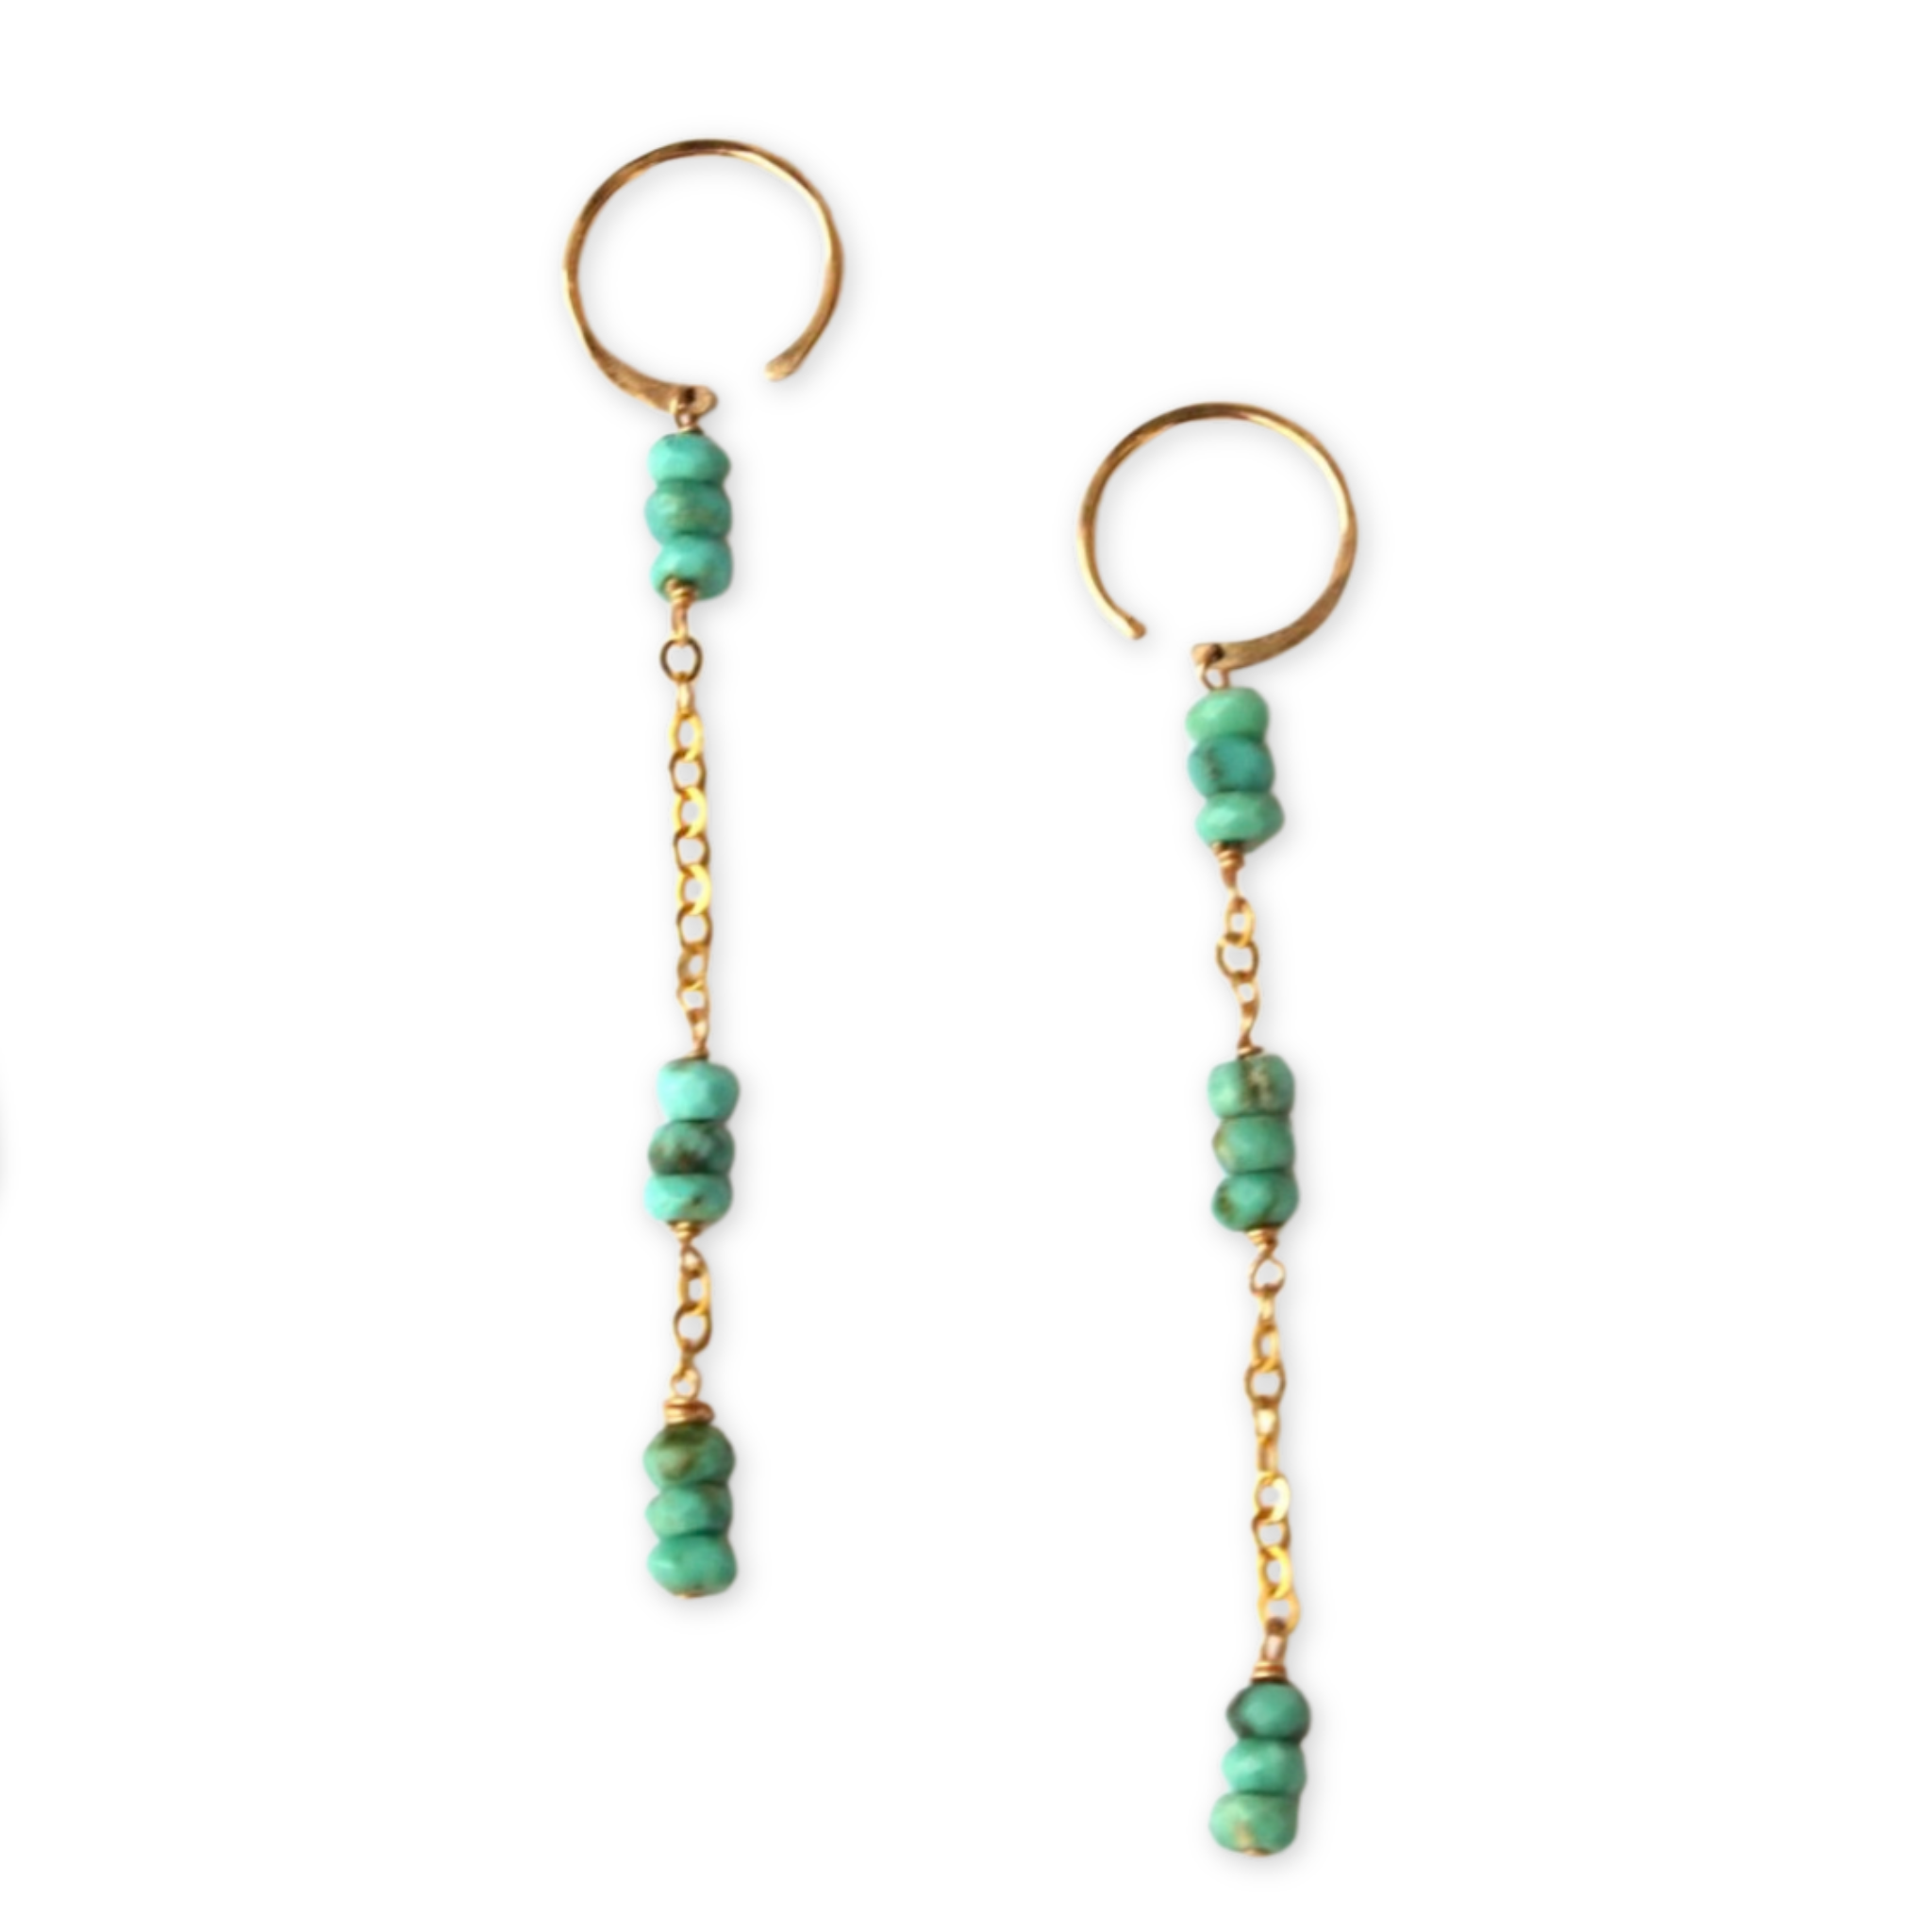 lobe hugger earrings with dangling chains and asymmetrical groups of turquoise stones